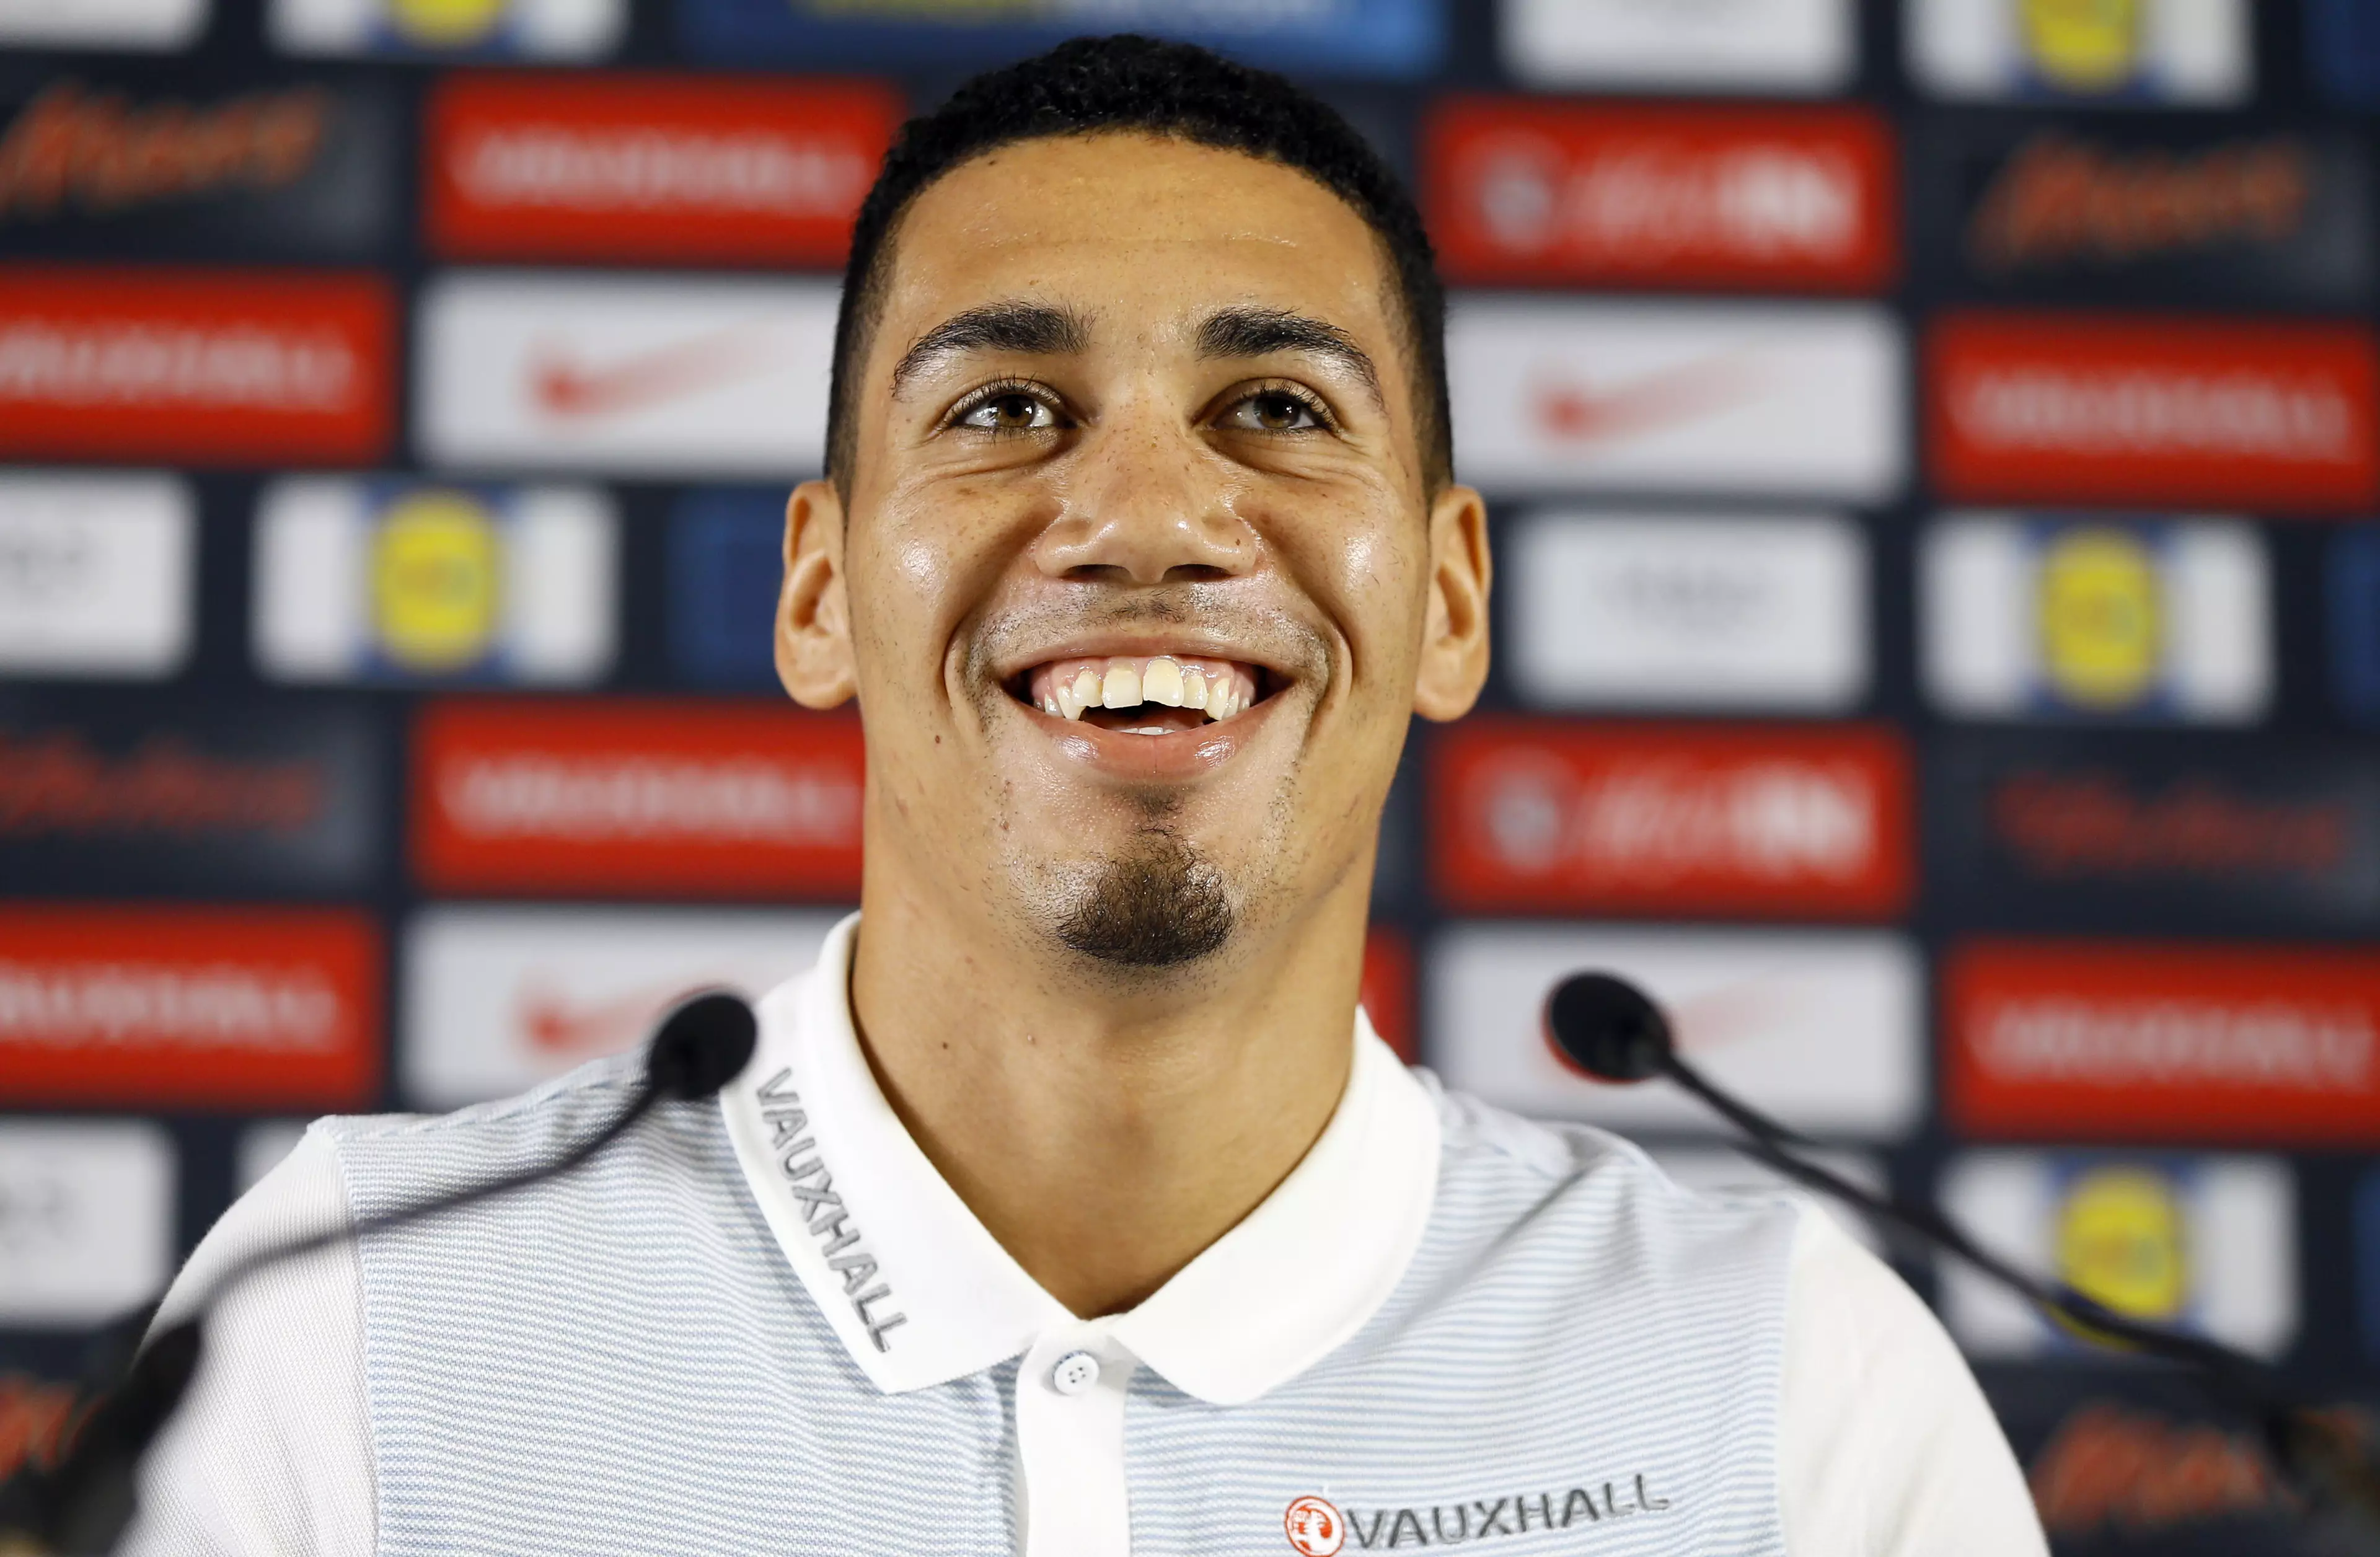 Will Smalling make it into the squad? Image: PA Images